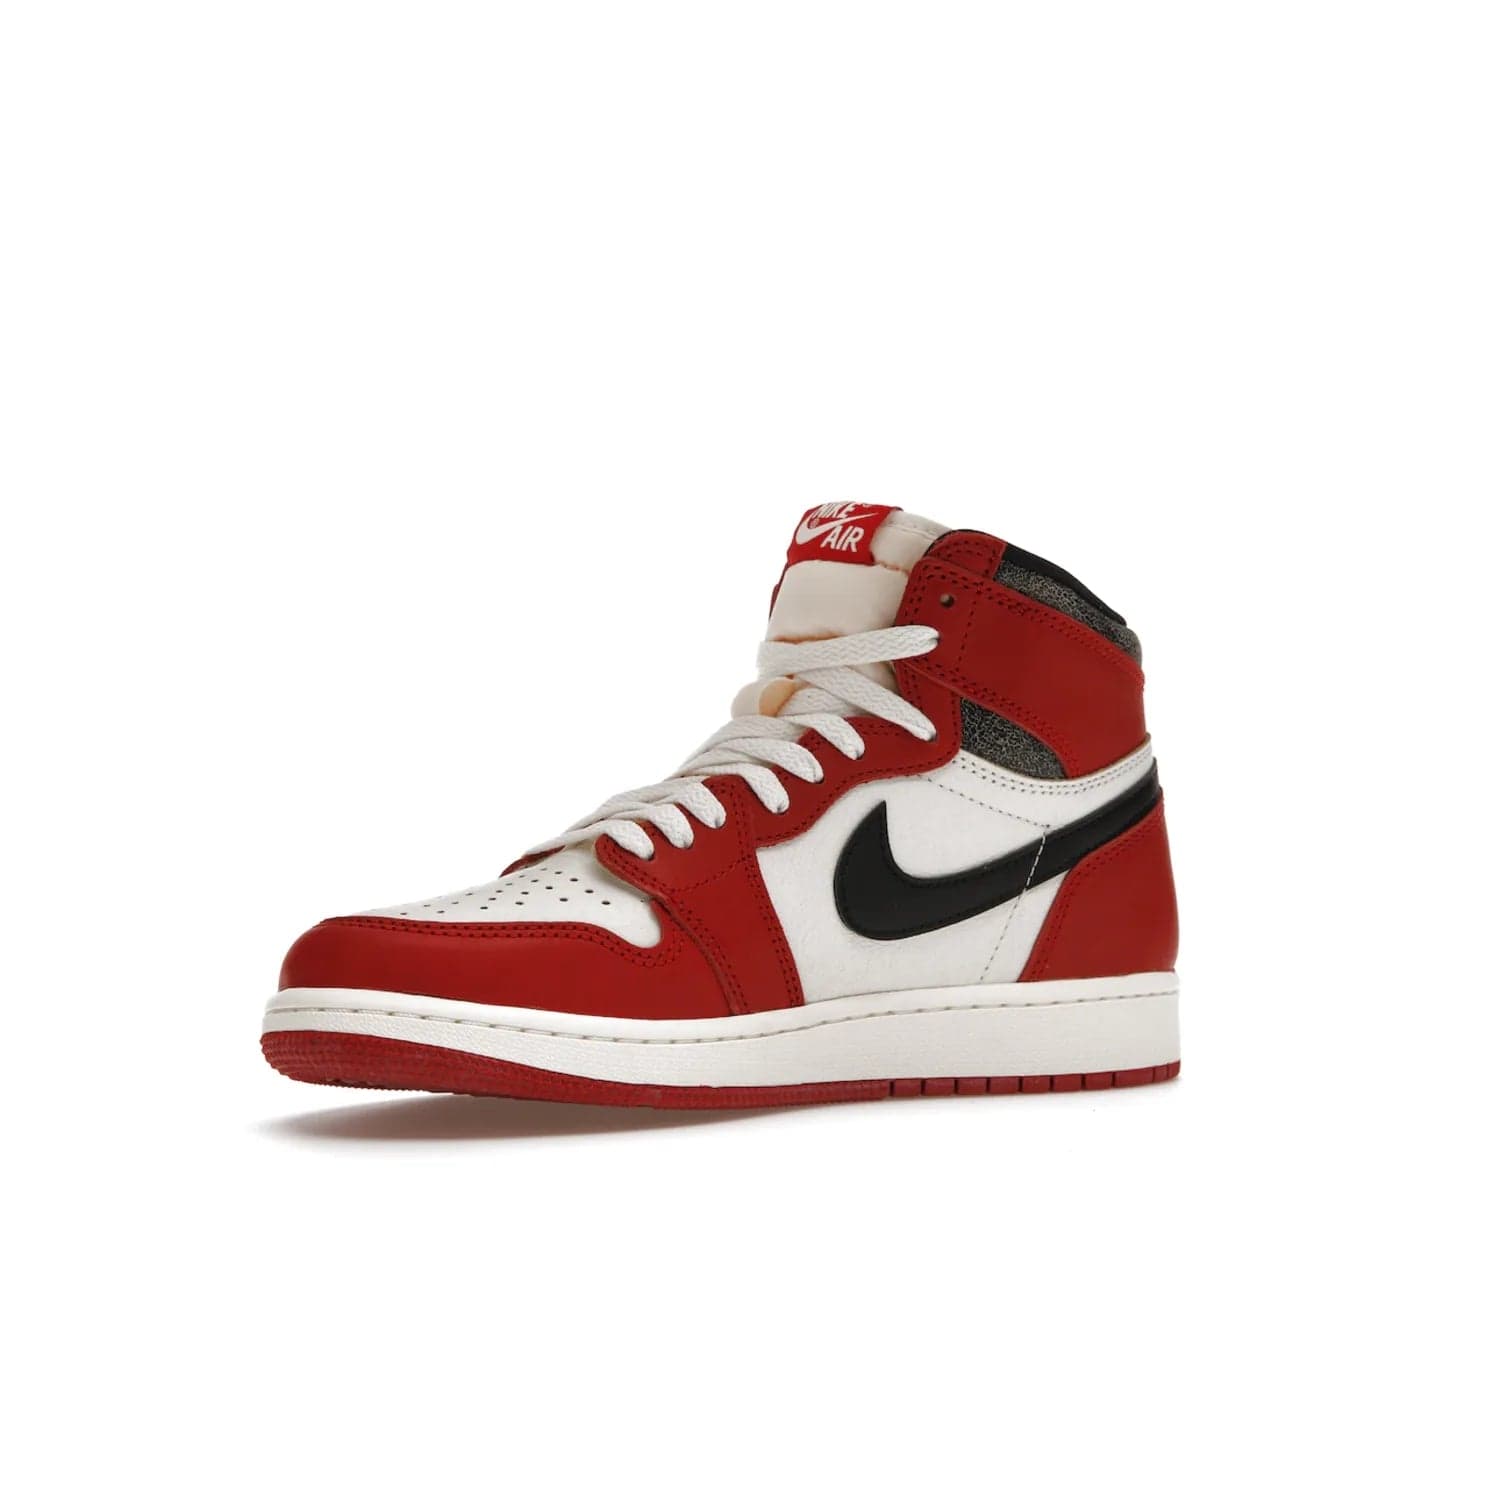 Jordan 1 Retro High OG Chicago Lost and Found (GS) - Image 16 - Only at www.BallersClubKickz.com - Grab the Air Jordan 1 Retro High OG Chicago Reimagined GS, presenting in classic 1985 silhouette. Varsity Red, Black, Muslin and Sail hues, featuring Nike Air branding, Wings on the collars and printed insoles. Don't miss out when it releases 19th Nov 2022.